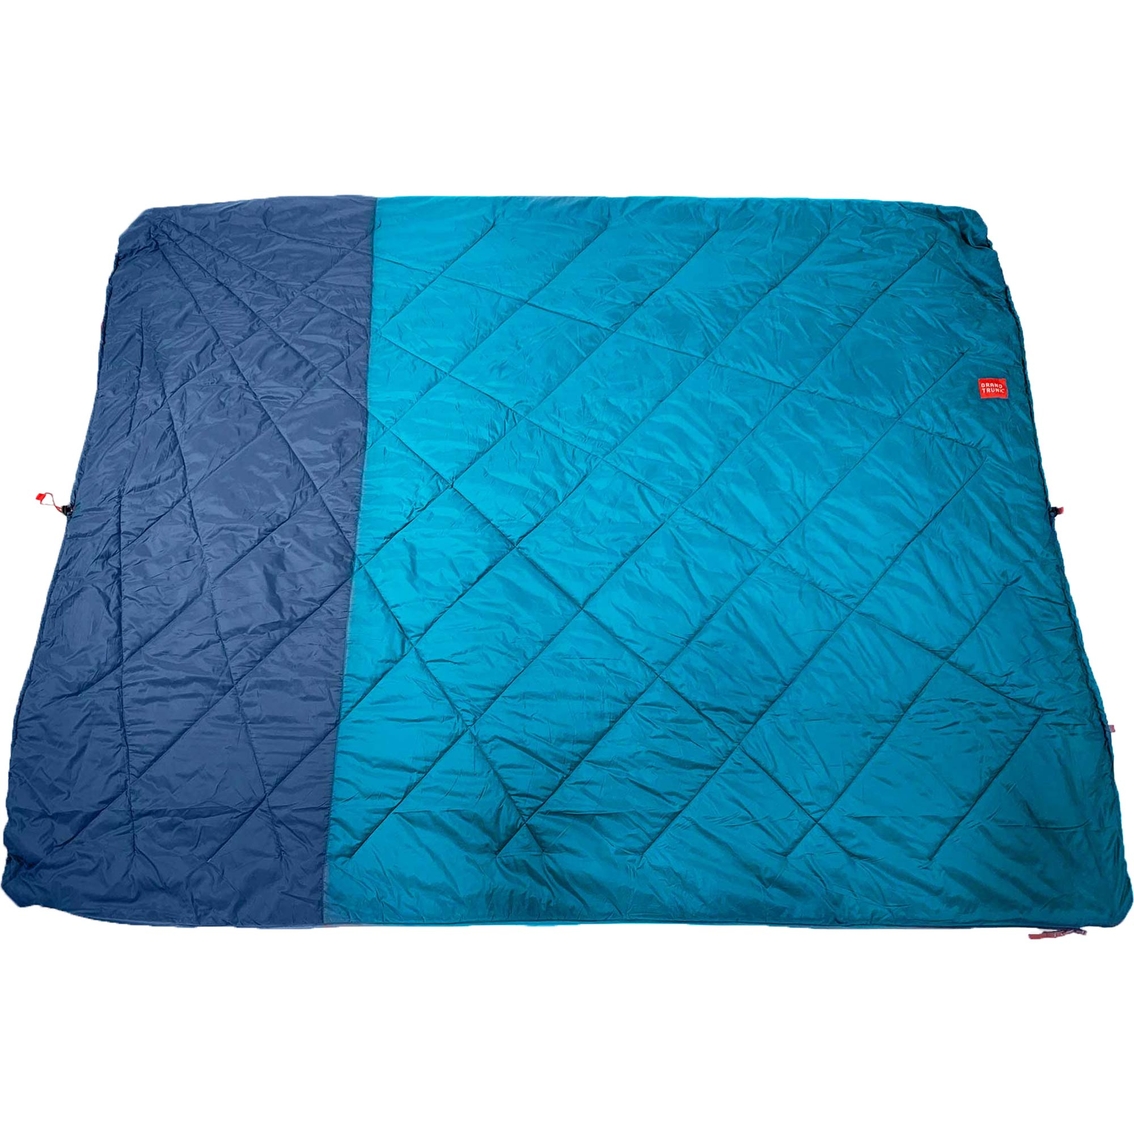 Grand Trunk 360 ThermaQuilt - Image 4 of 9